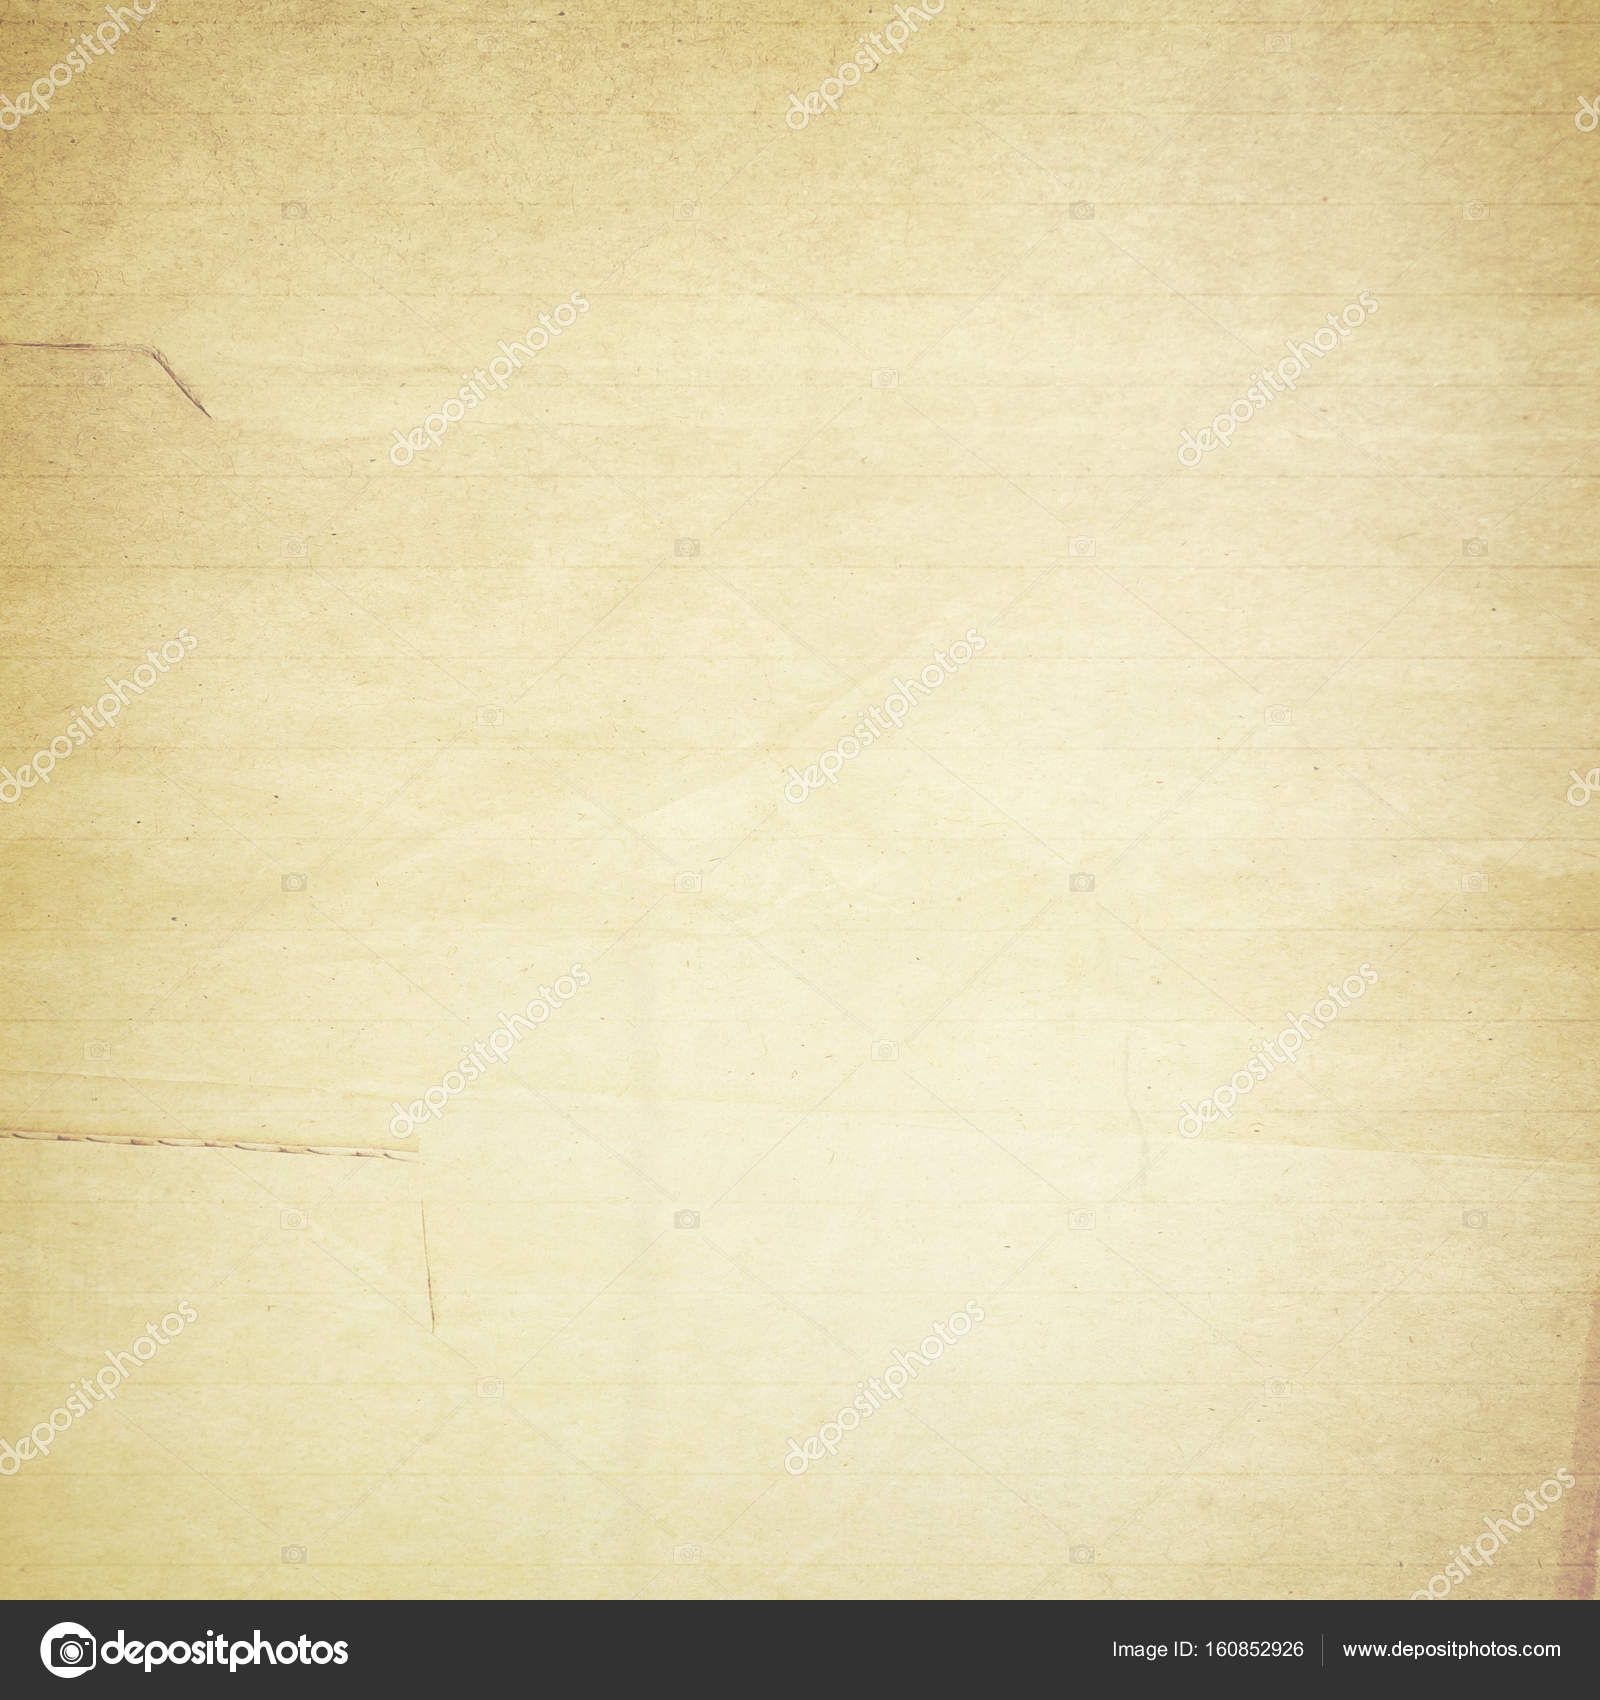 simple vintage texture old paper background — Stock Photo © ilolab ...